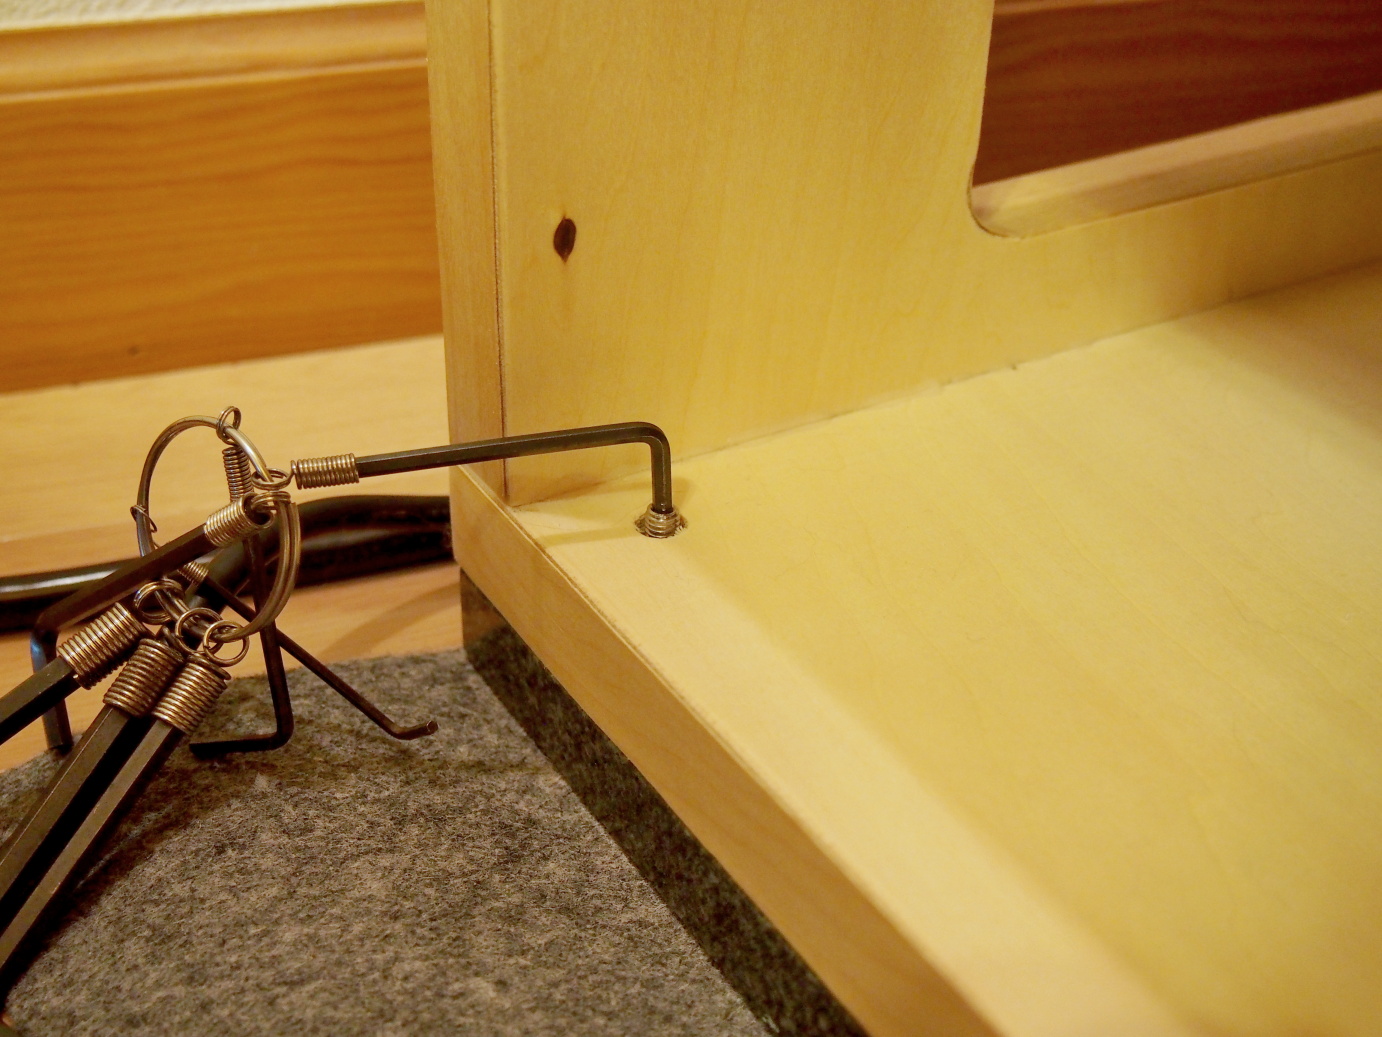 2. Screw the Allen screws so that the main body float from the granite base.